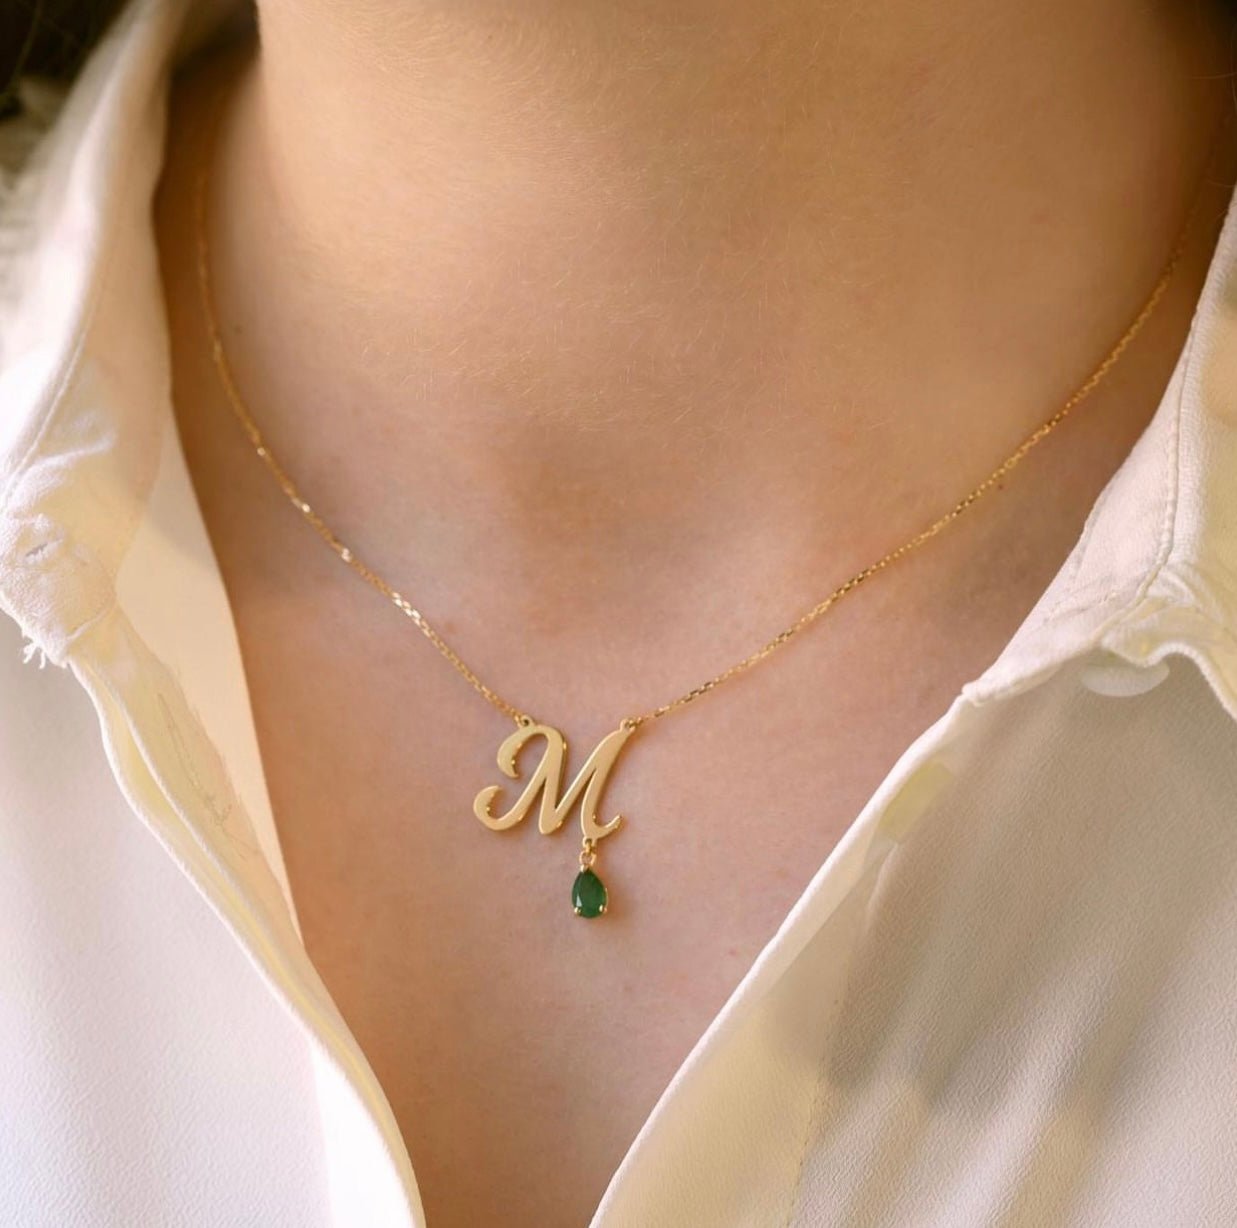 Initial Necklace in Emerald - 18k Gold - Ly